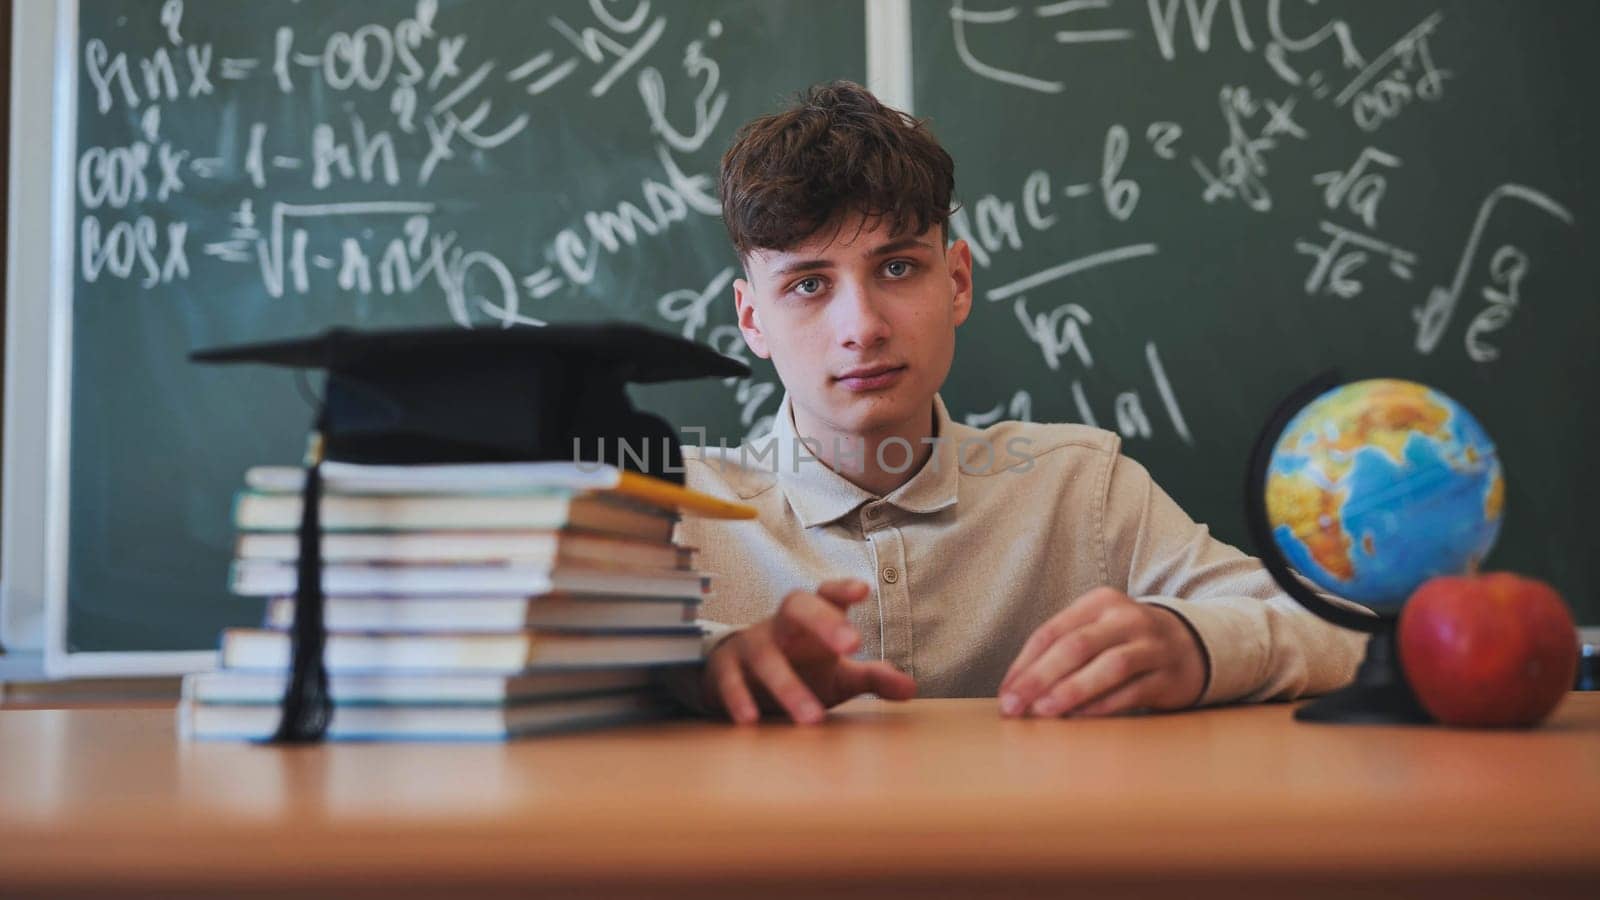 Portrait of a high school student against a background of blackboard, globe and books with cap